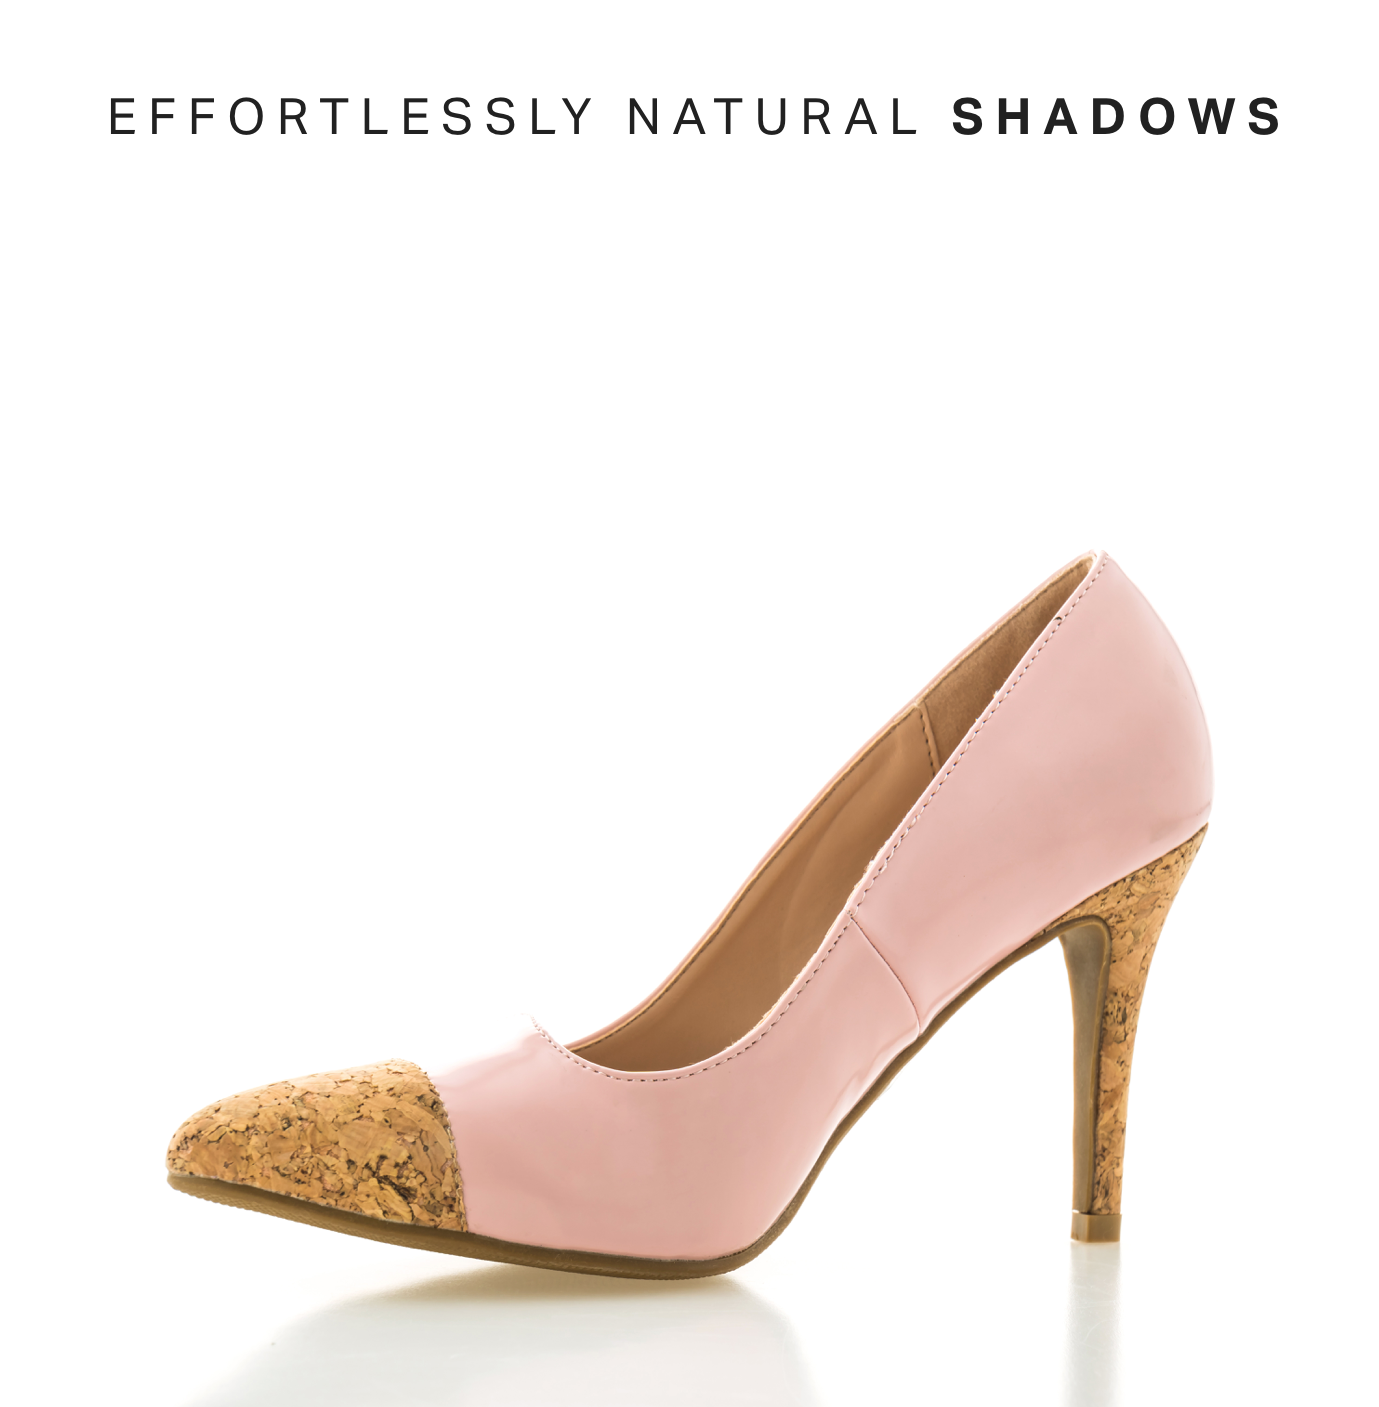 8 .shadows - photography tips for ecommerce branding